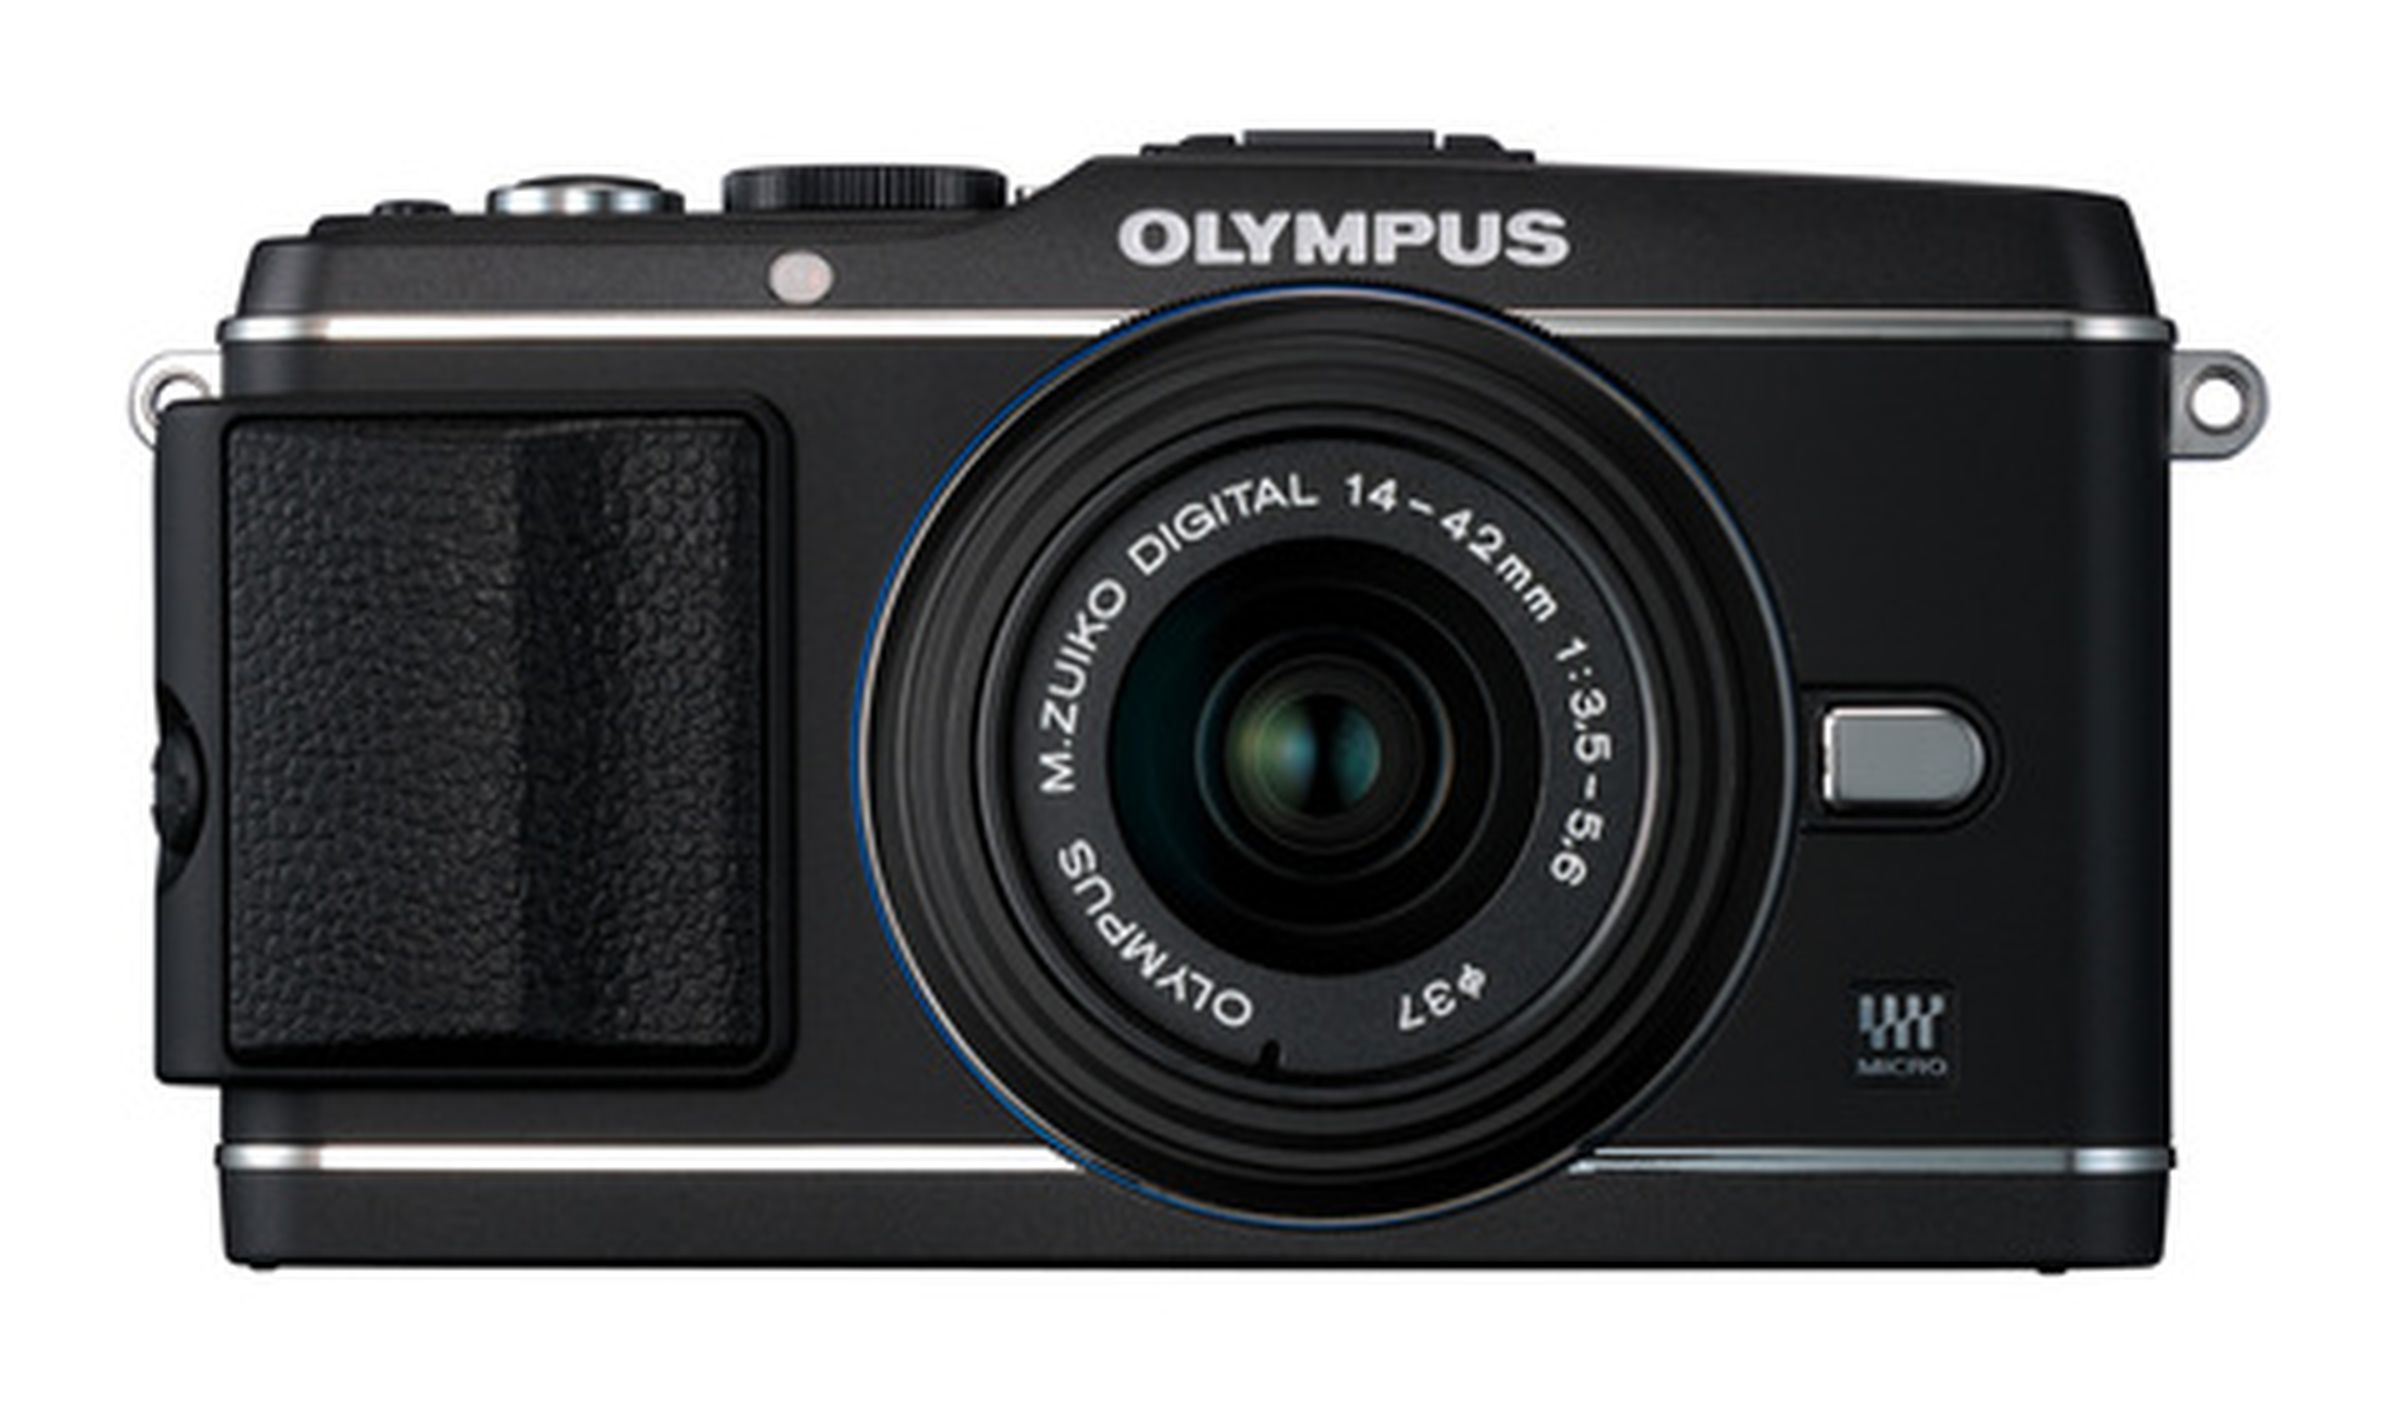 Olympus E-P3, E-PL3, and E-PM1 pictures